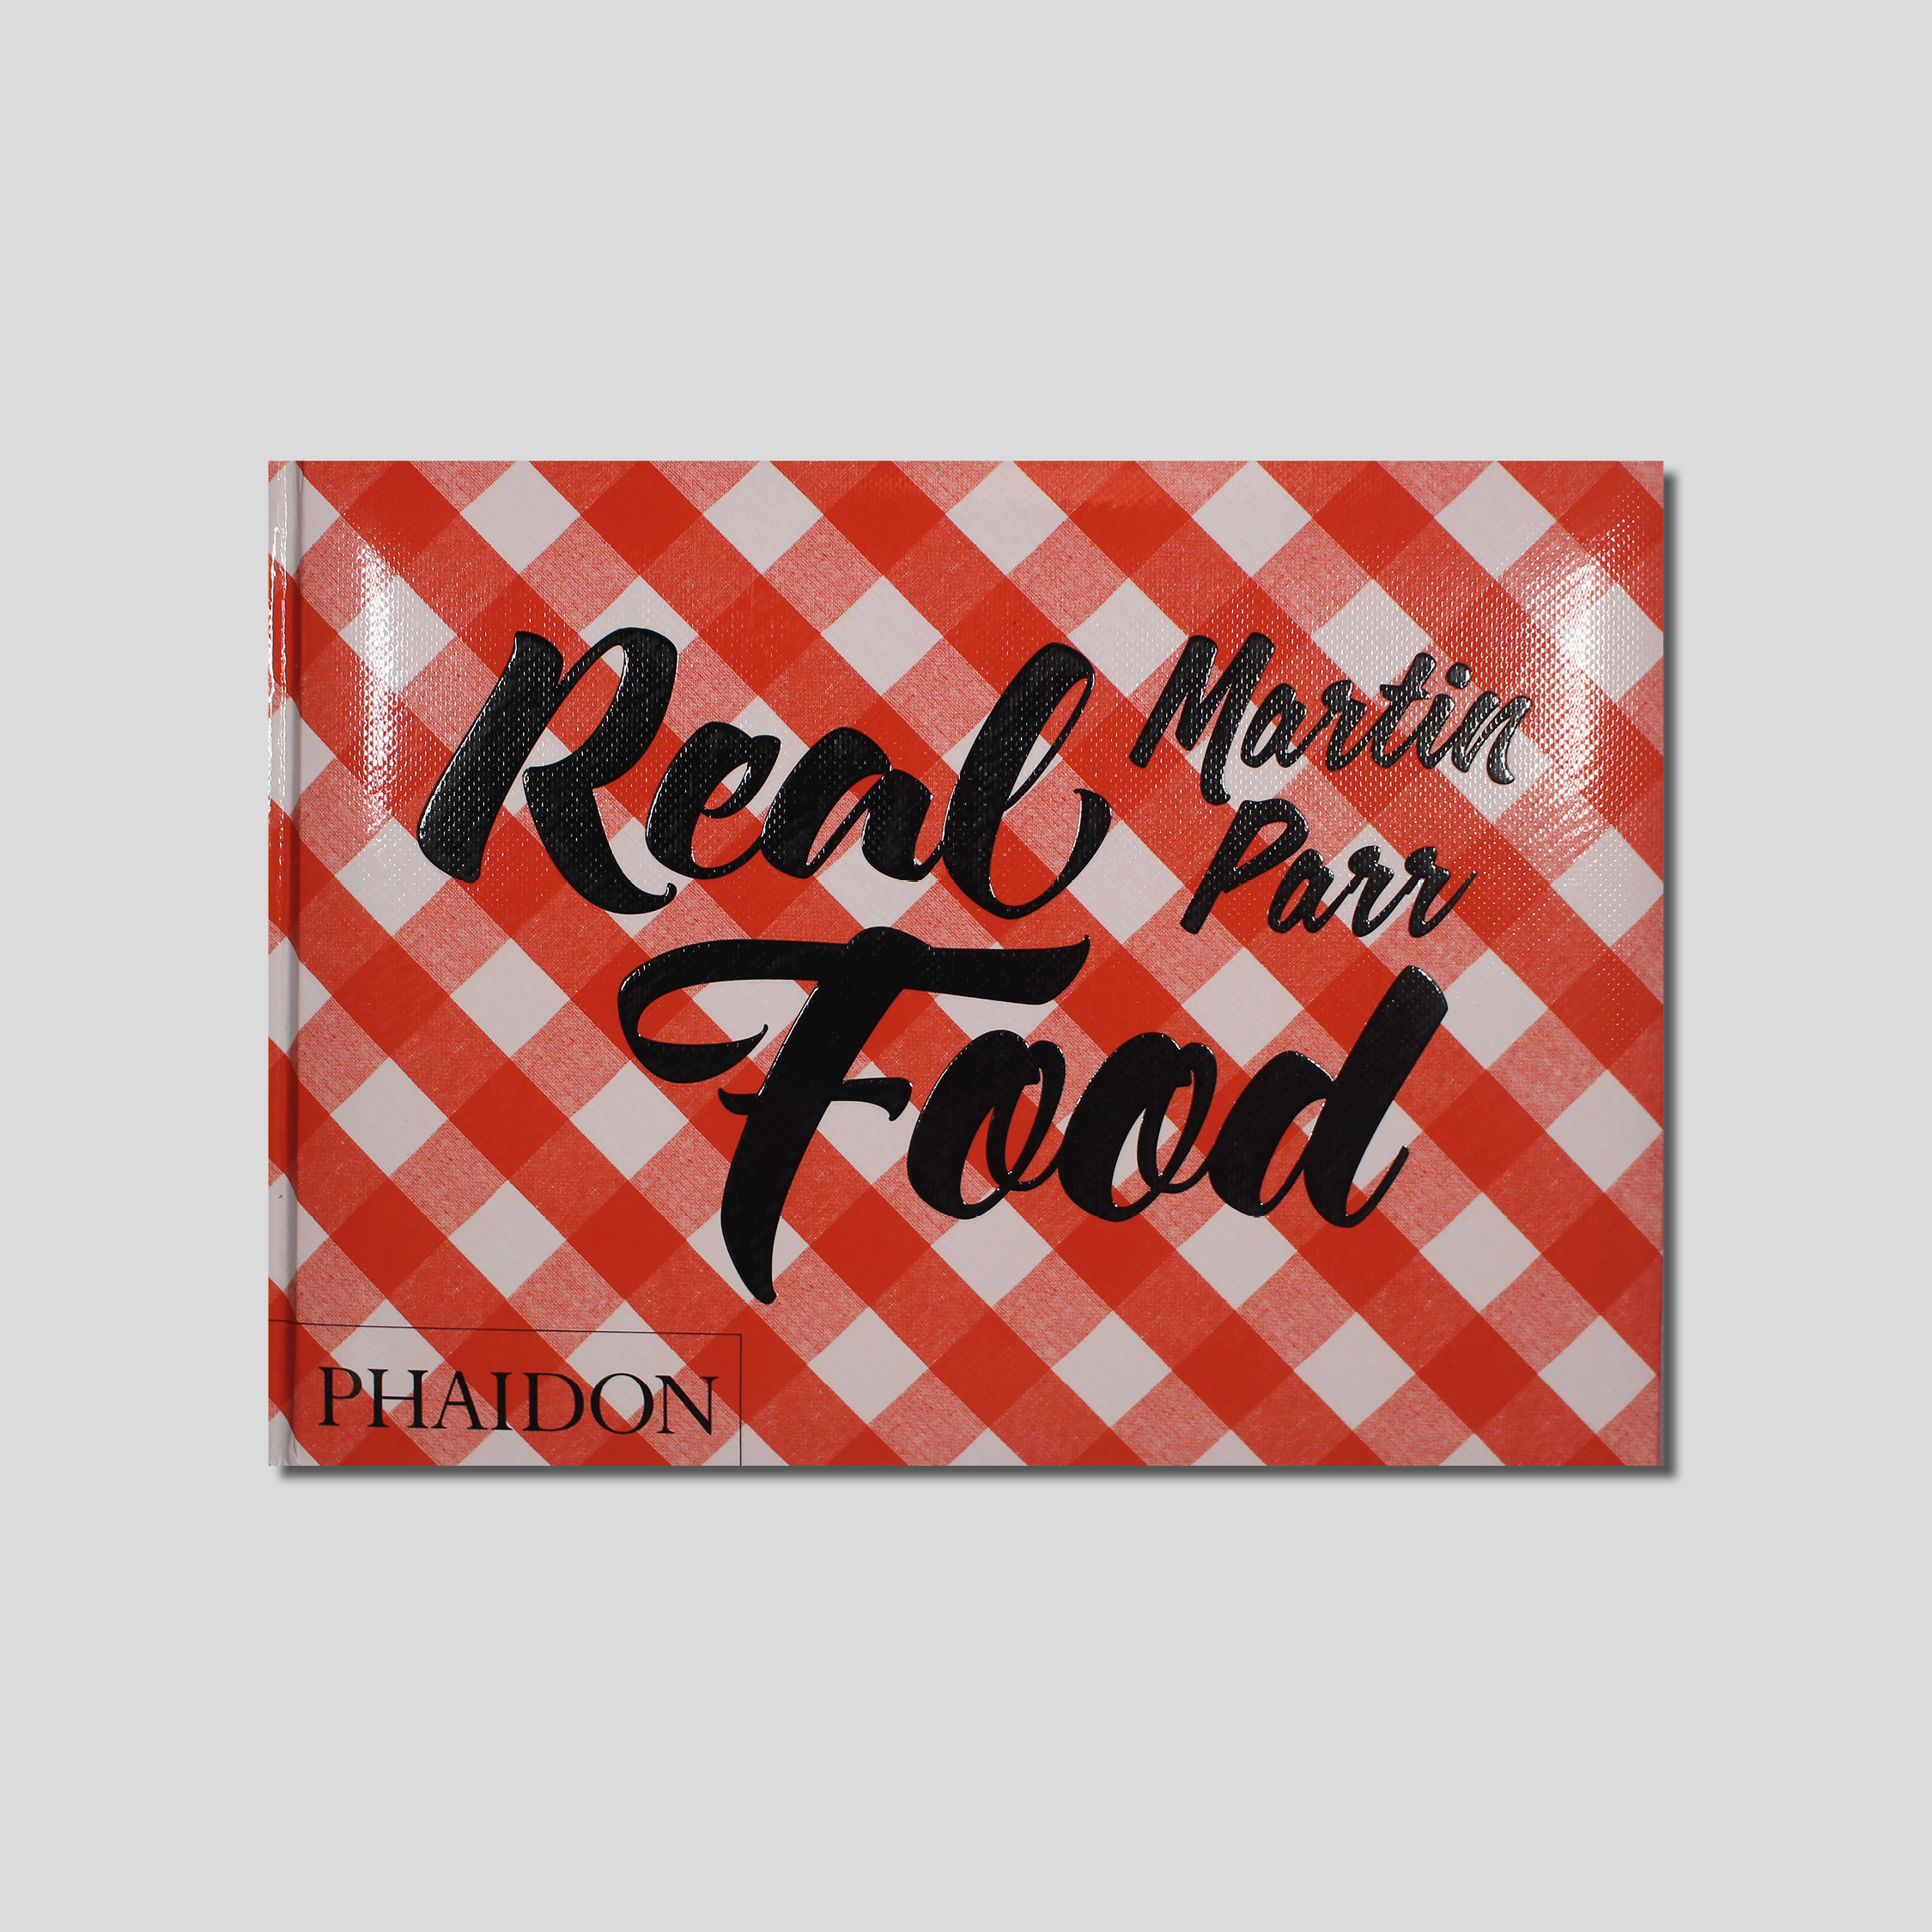 Bookcover Martin Parr Real Food